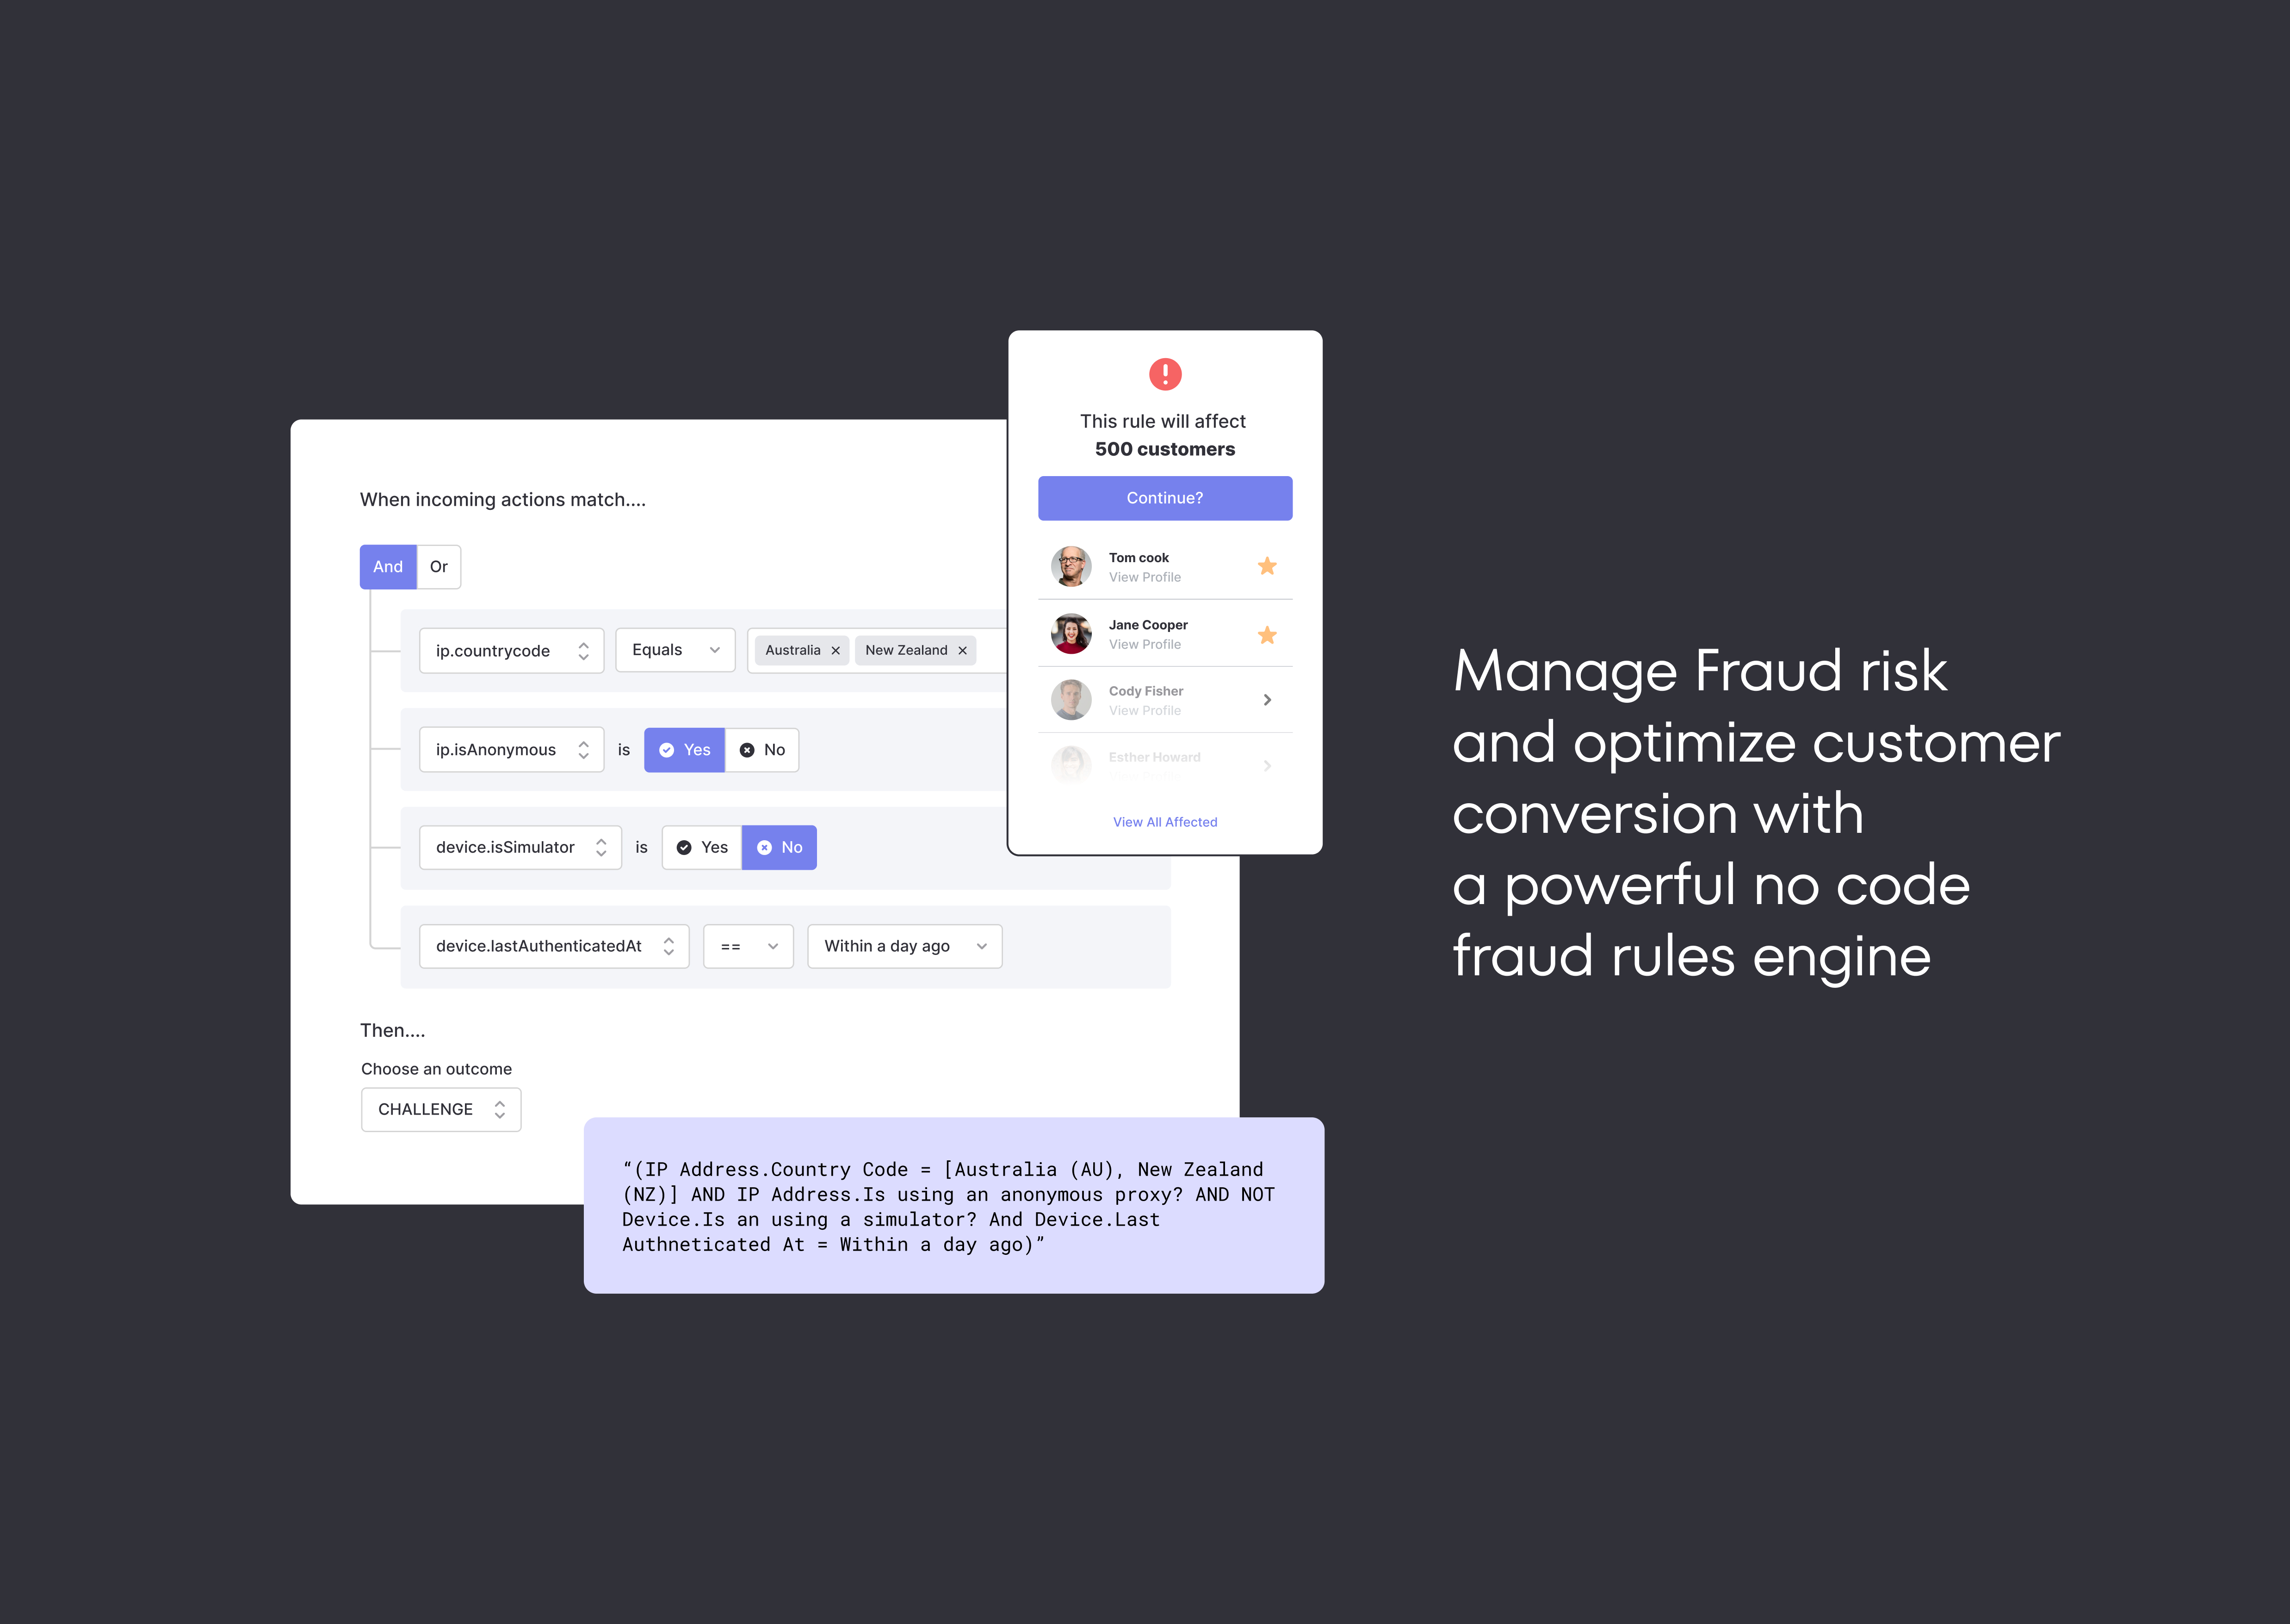 A Powerful No Code Fraud Rules Engine To Manage Risk and Mitigate Fraud